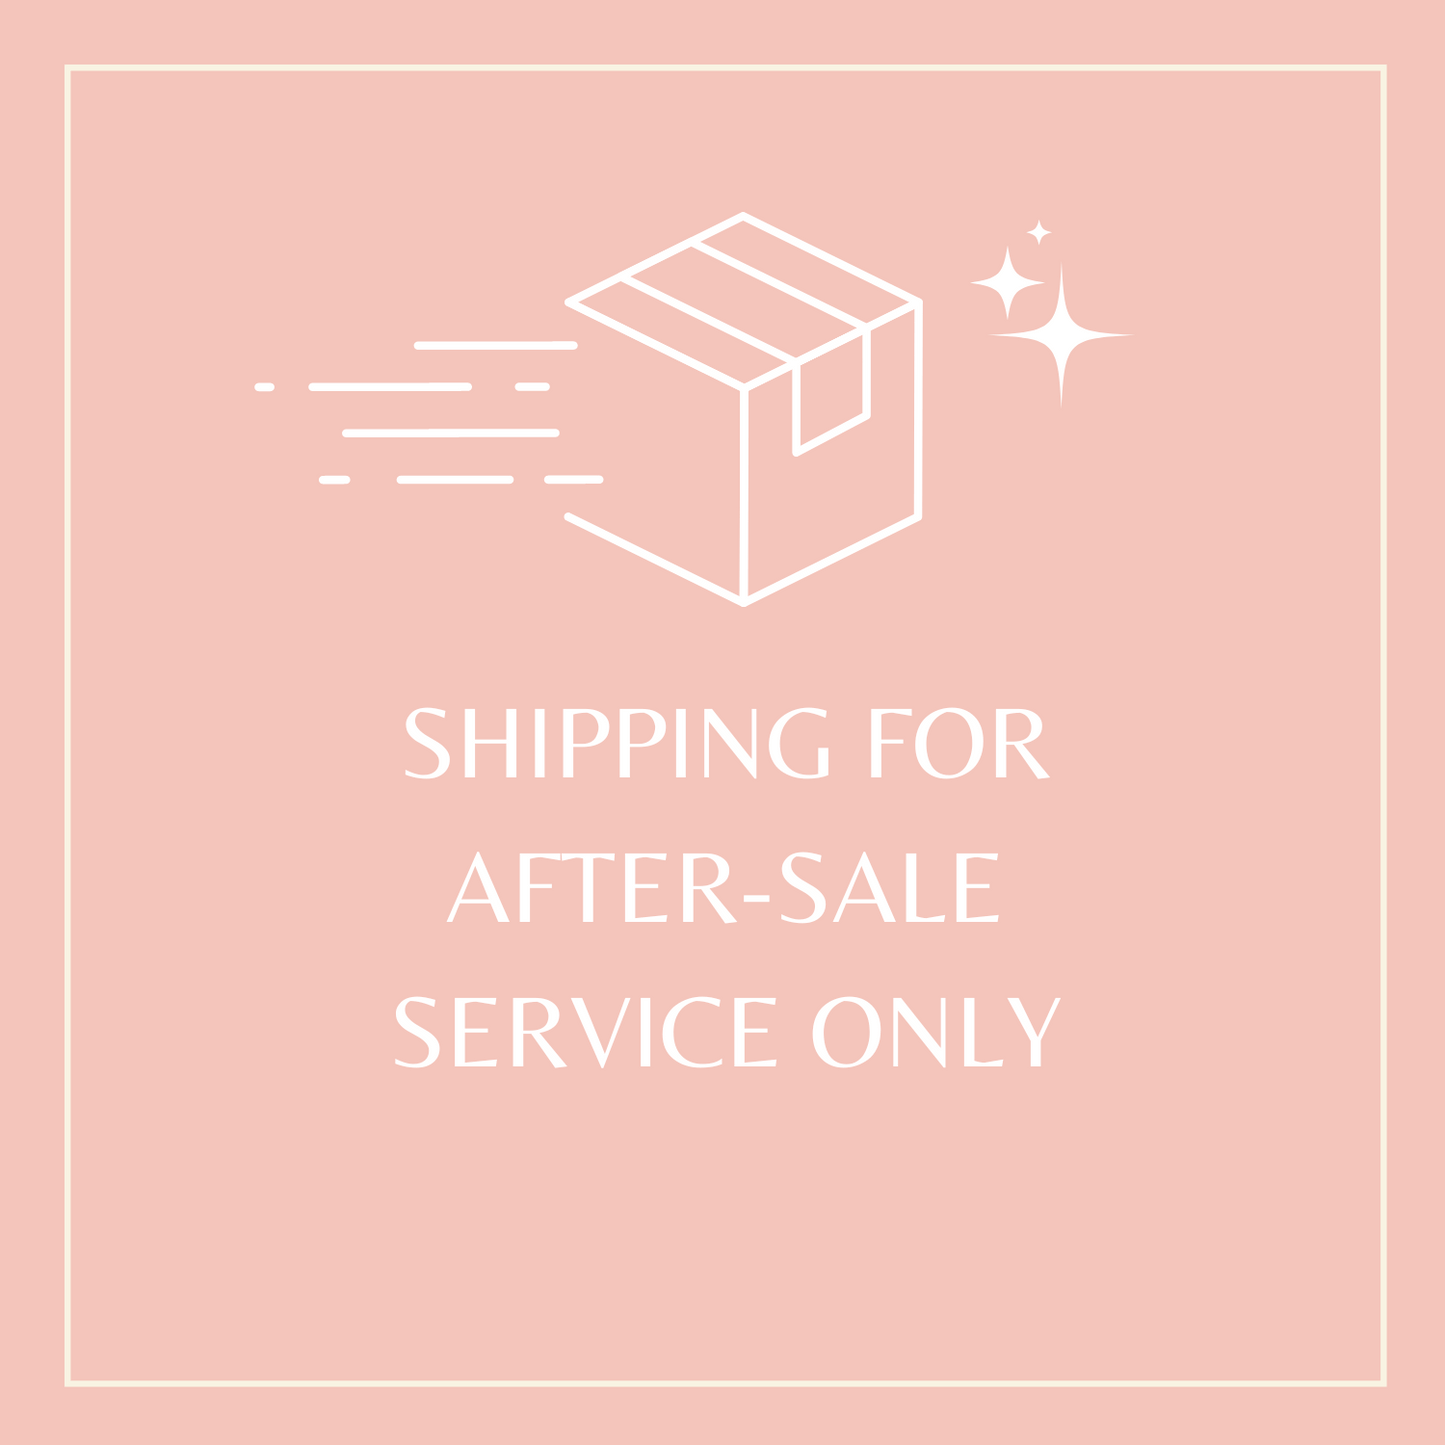 SHIPPING FOR AFTER-SALE SERVICE ONLY 5